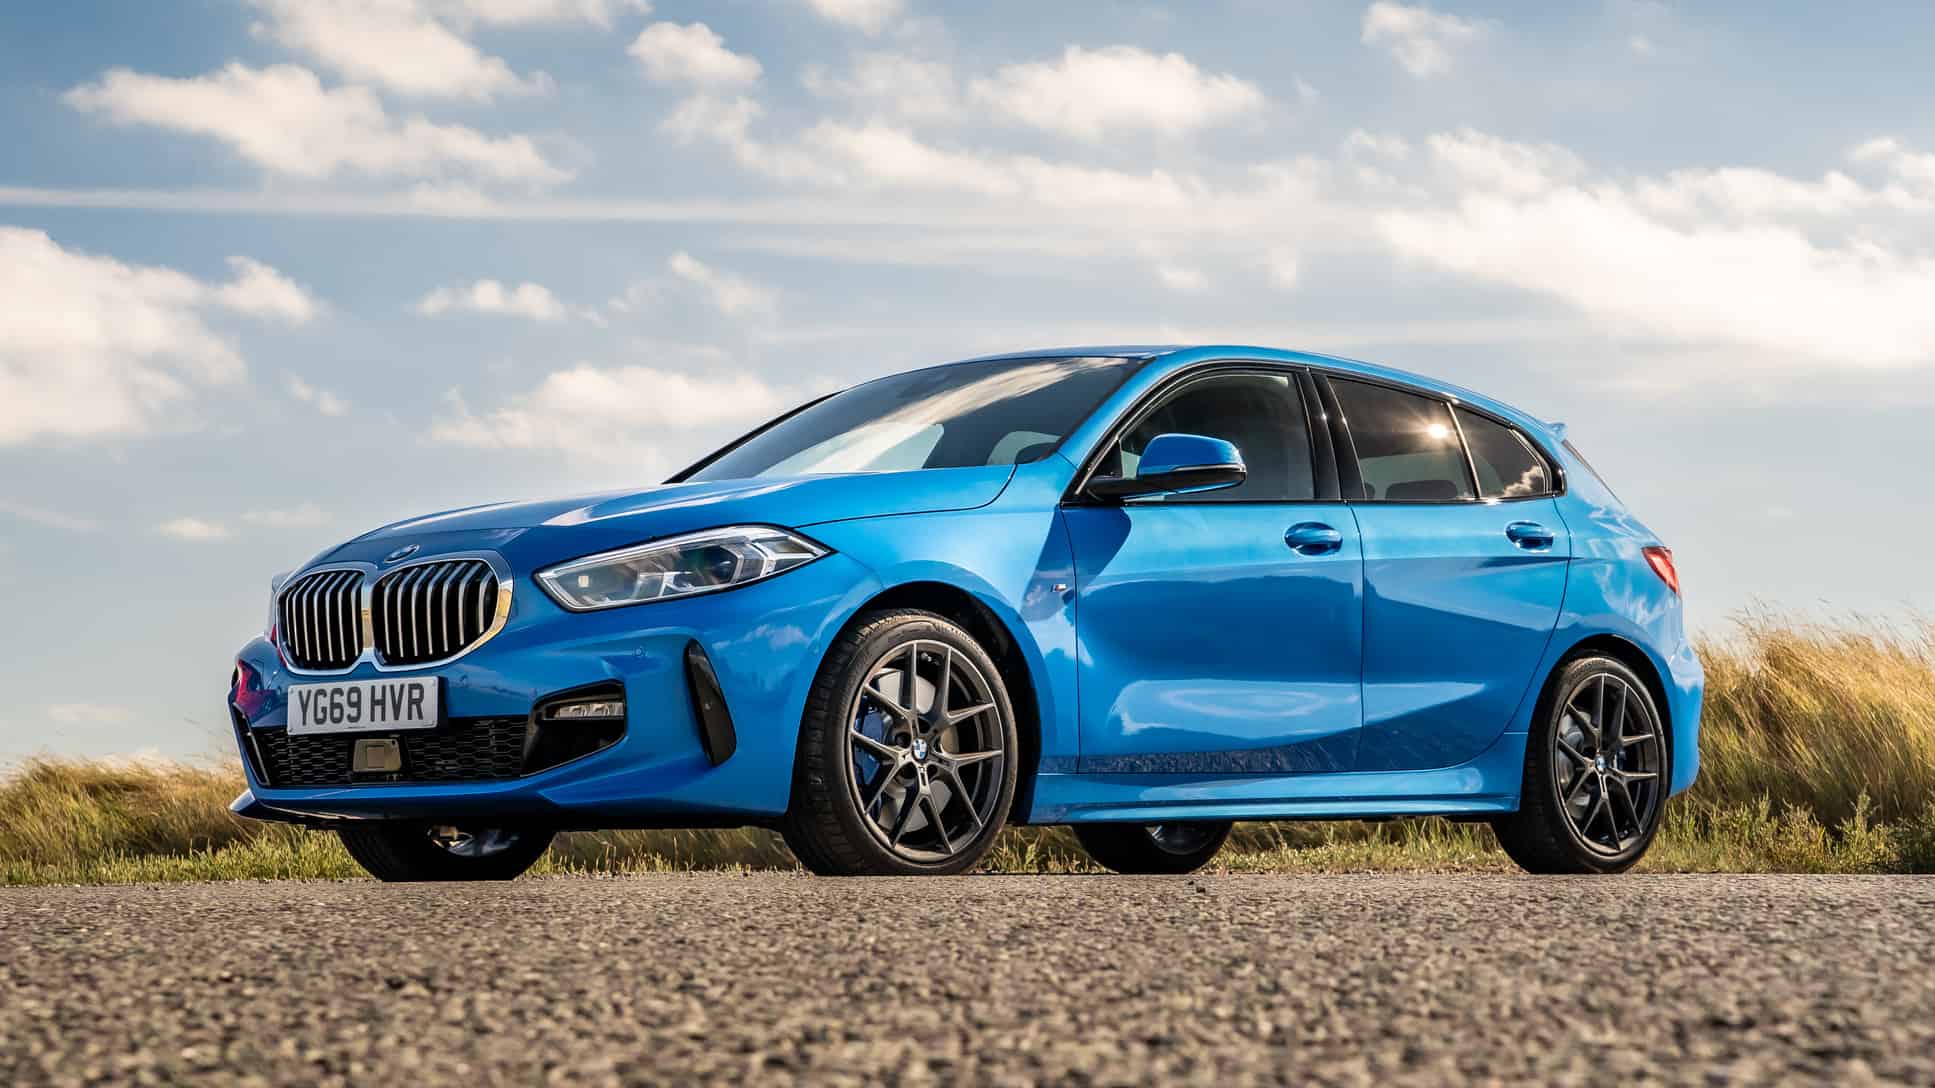 BMW 1 Series: details and technical data